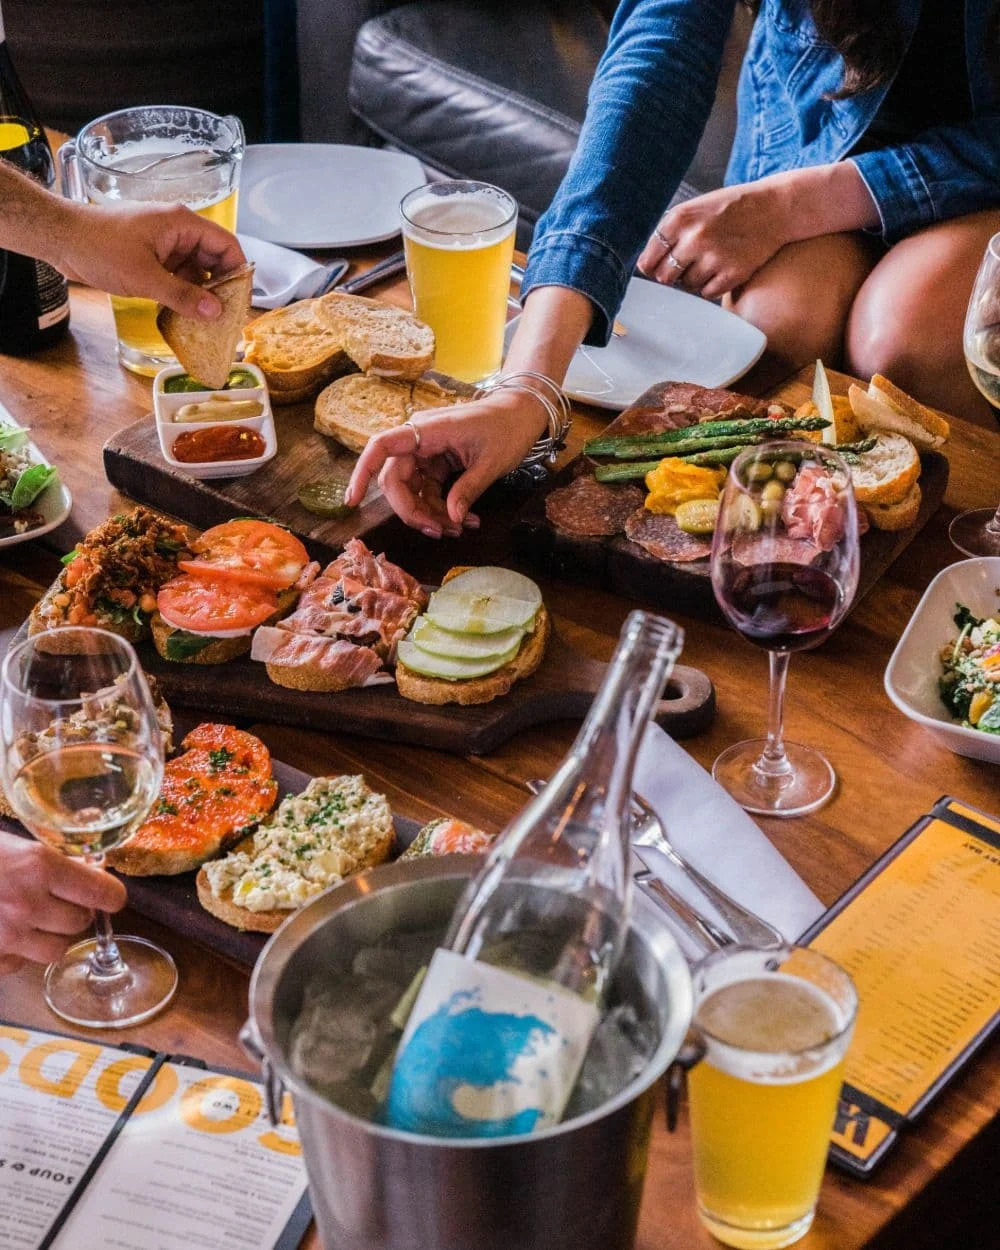 A table full of food and wine glasses with people reaching for the food.